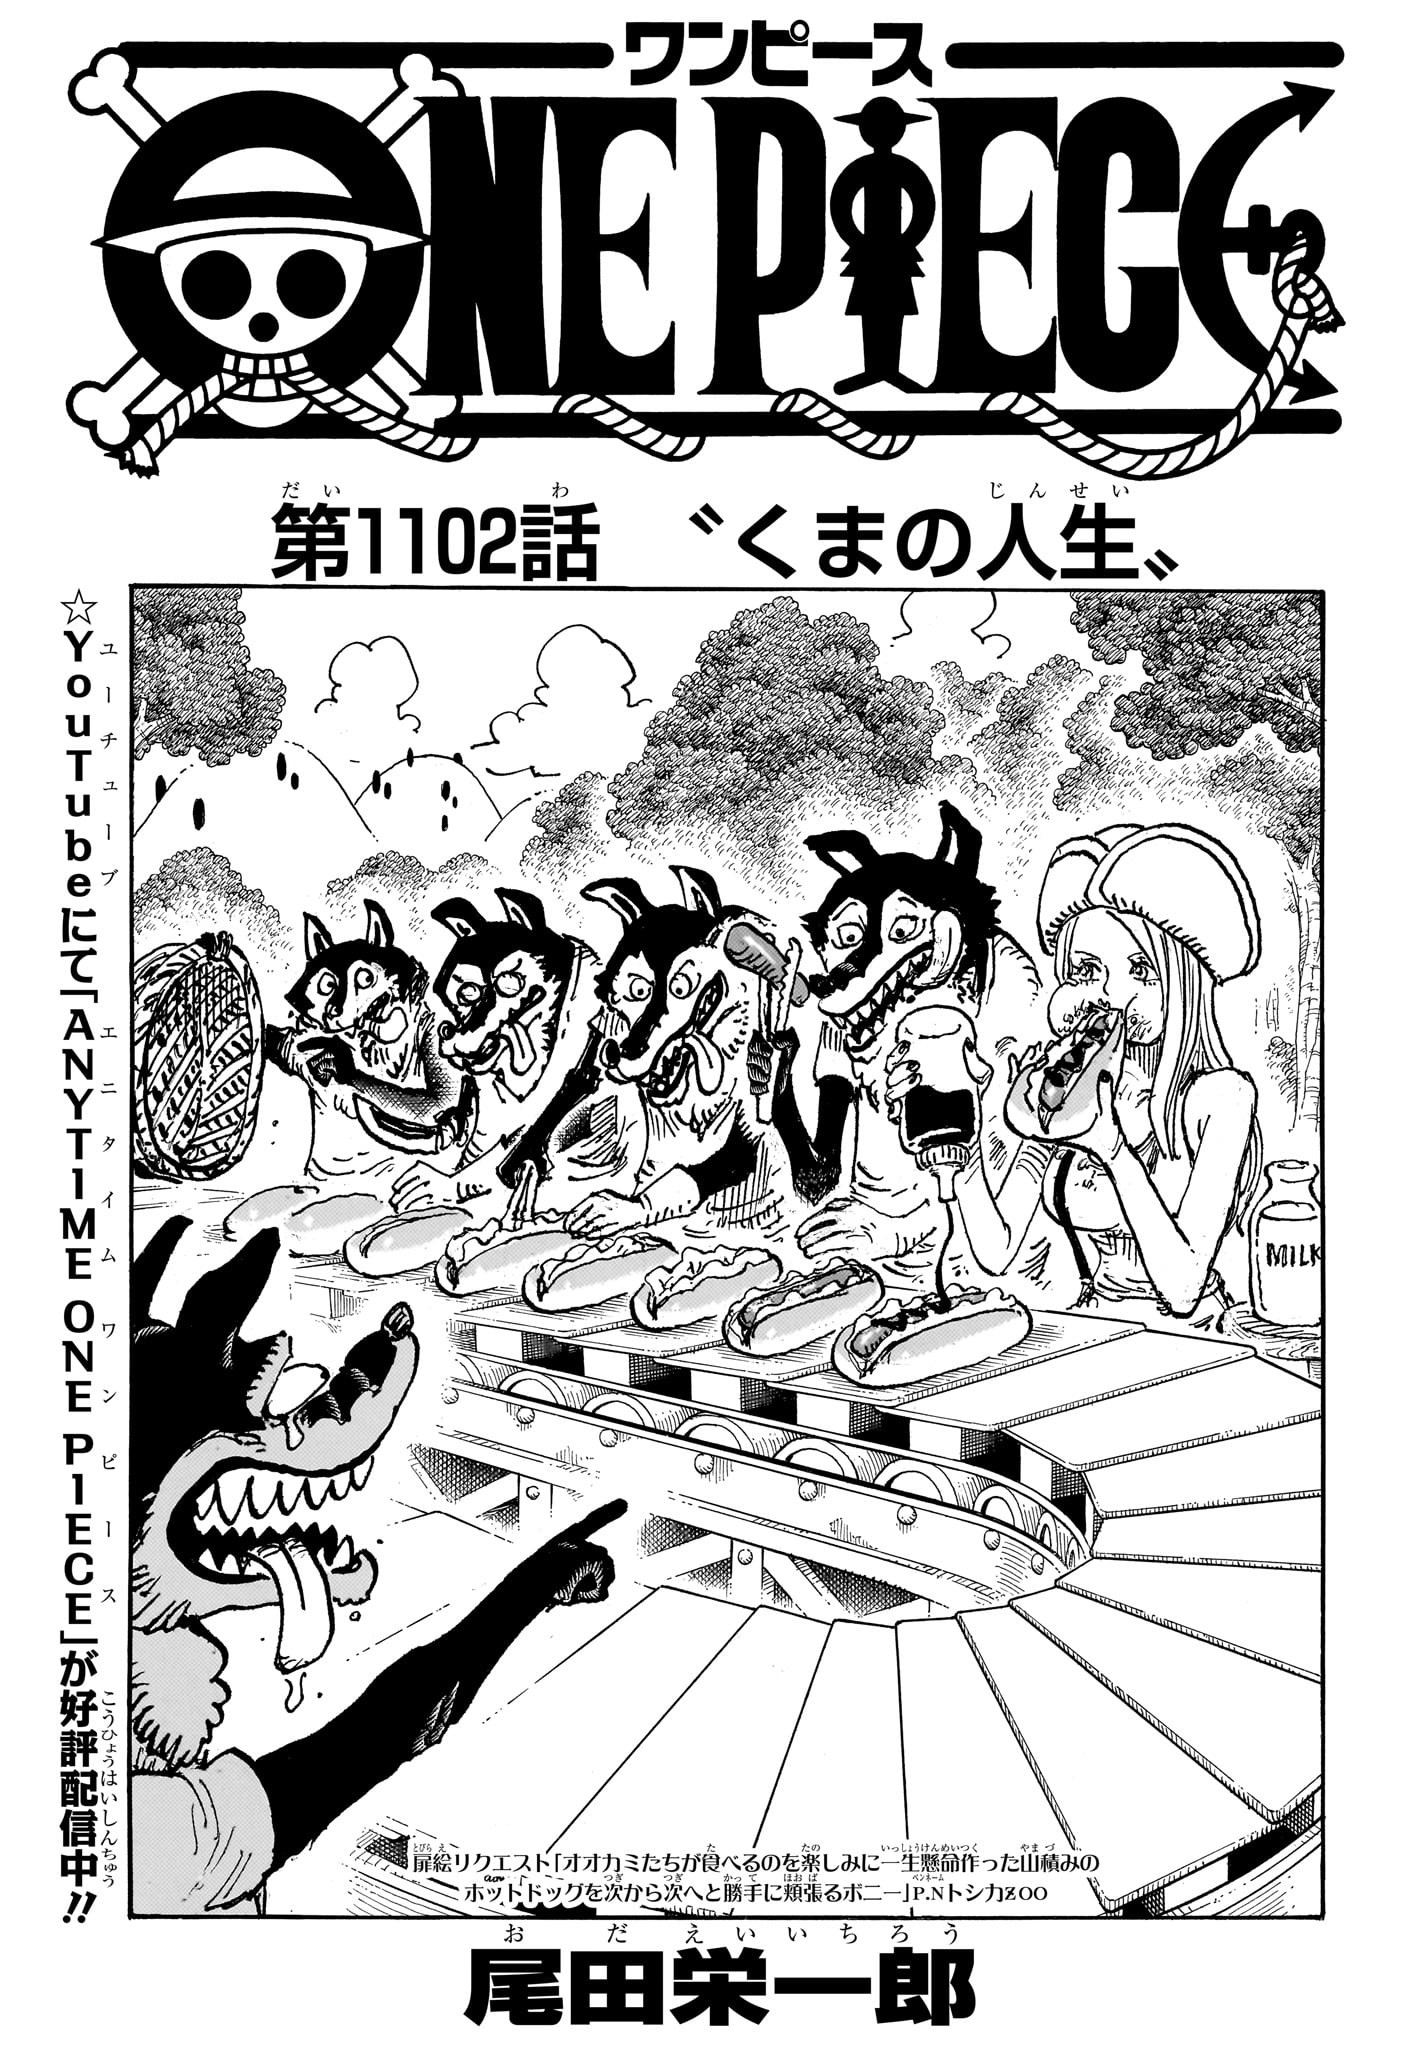 One Piece - Chapter 1102 - Page 1